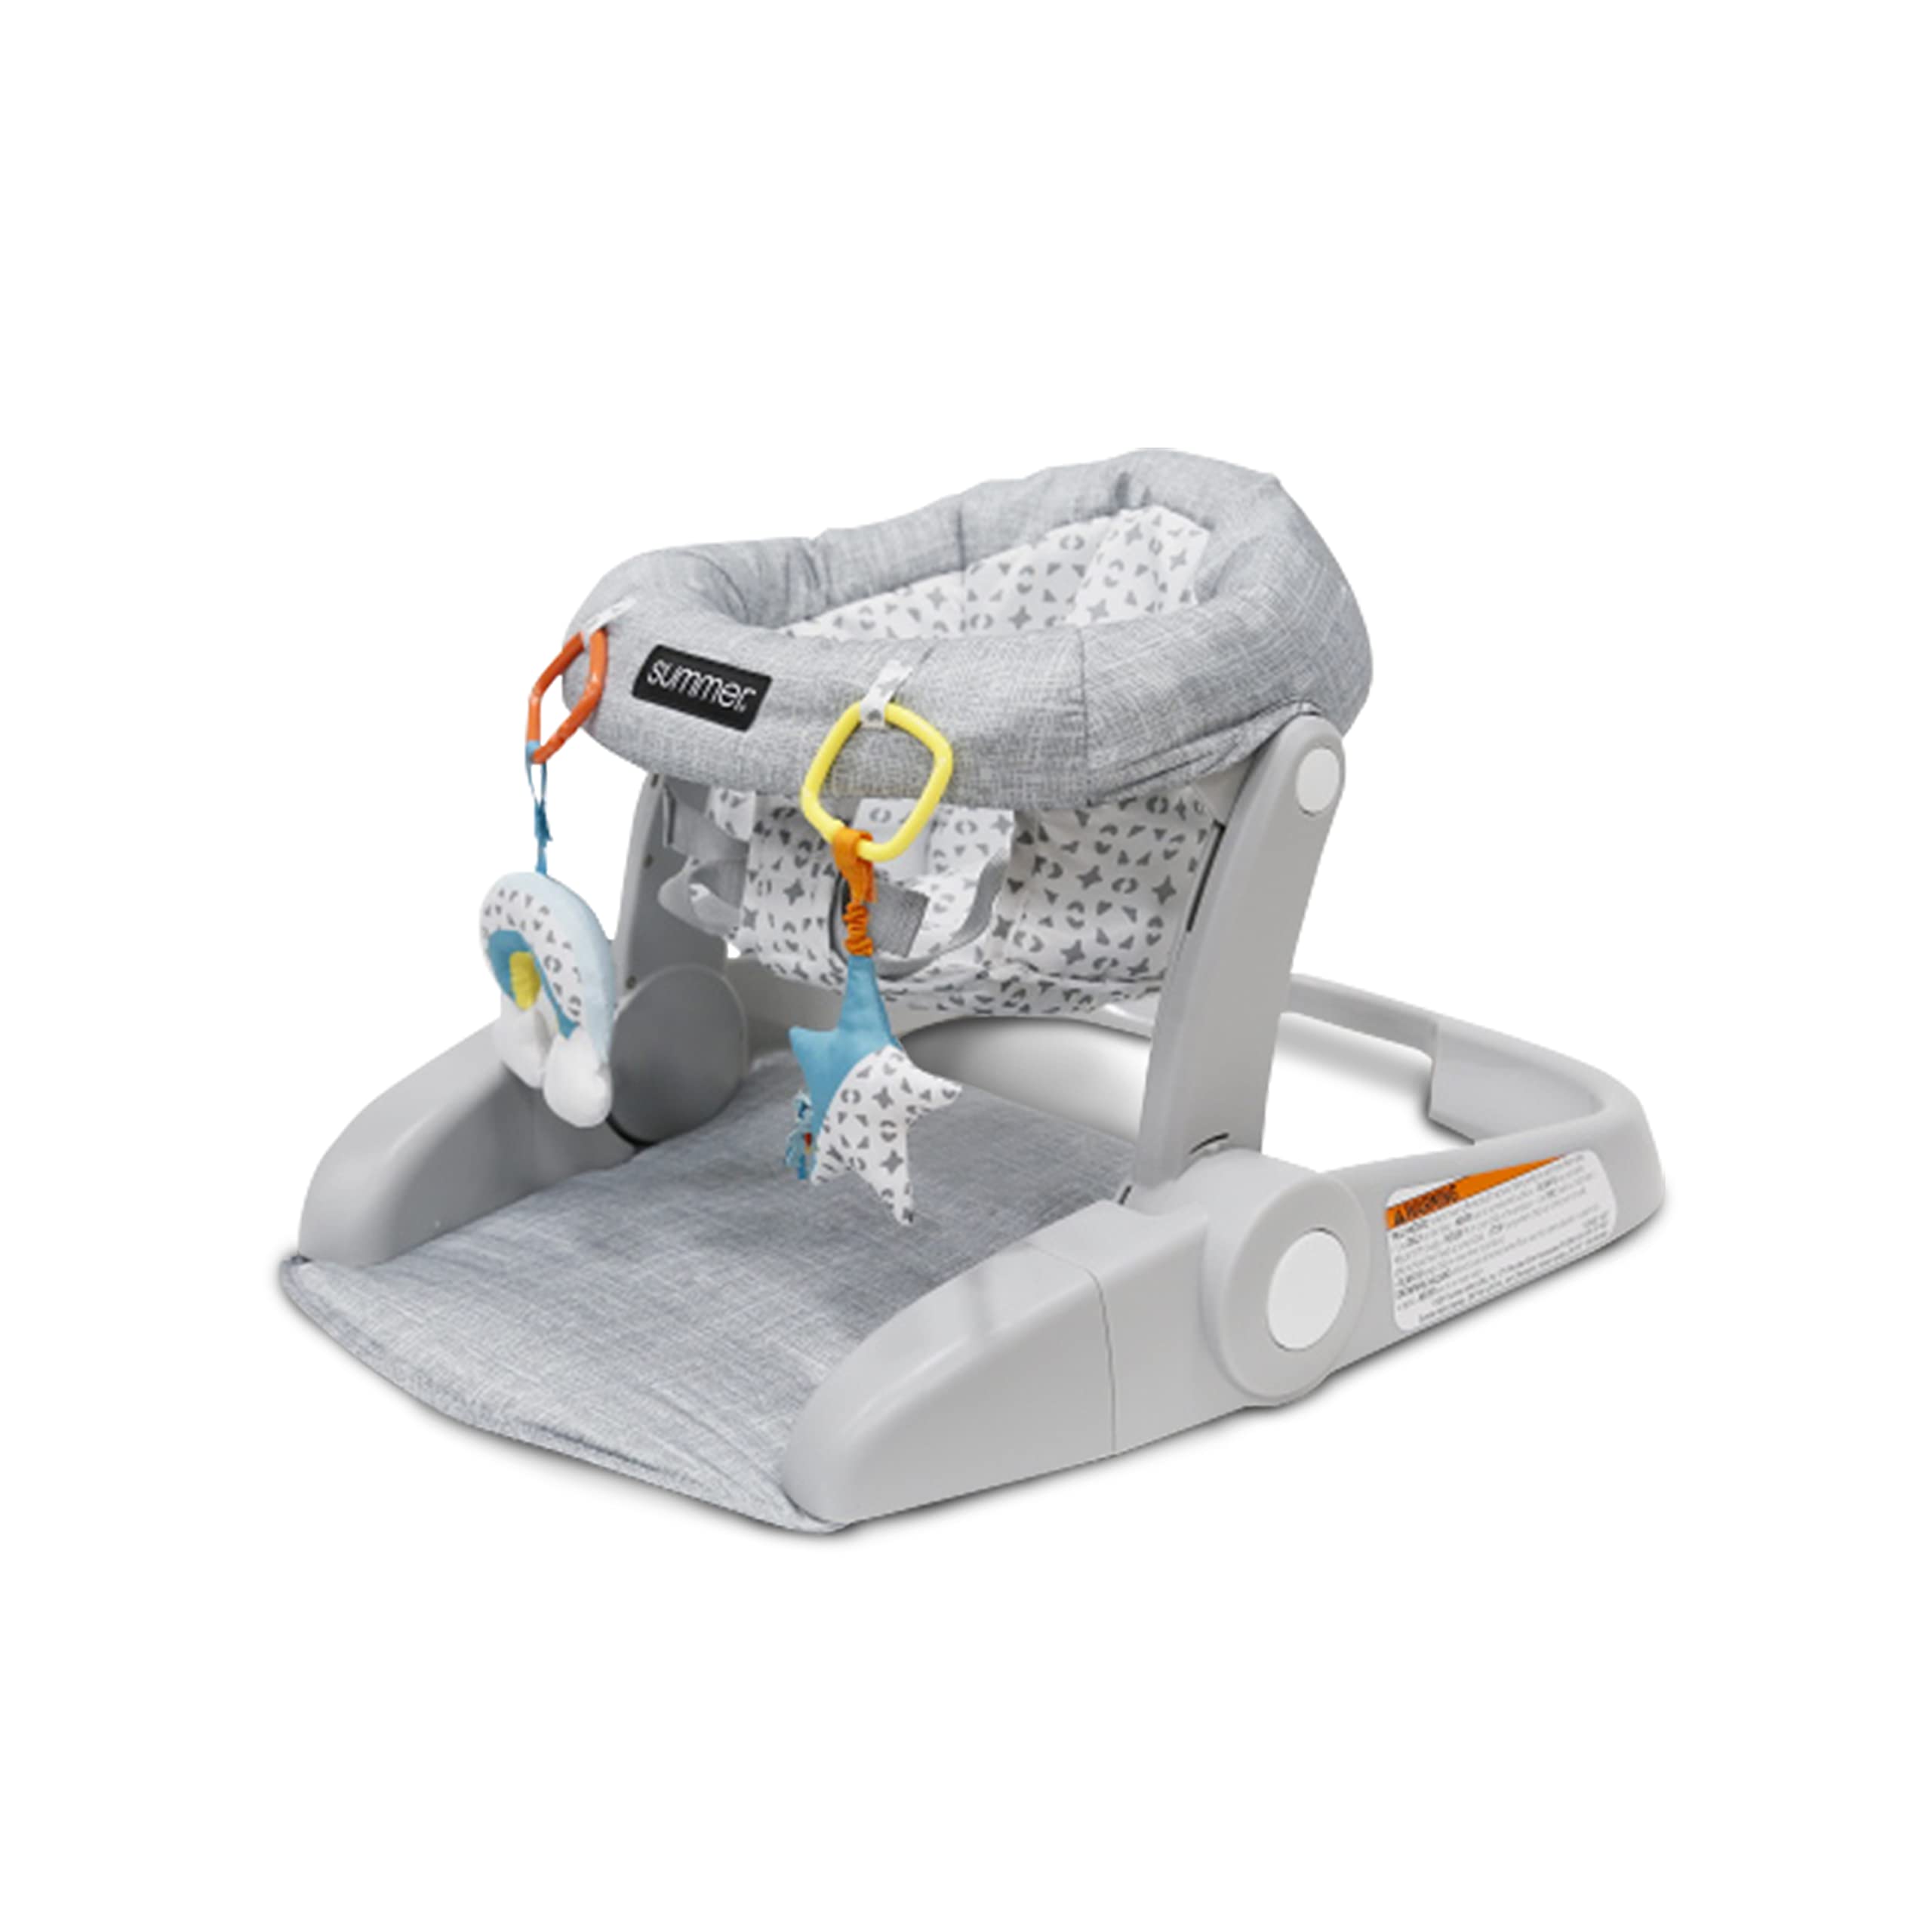 Summer® Learn-to-Sit™ 2-Position Floor Seat (Heather Gray) – Sit Baby Up in This Adjustable Baby Activity Seat Appropriate for Ages 4-12 Months – Includes Toys, Funfetti Neutral